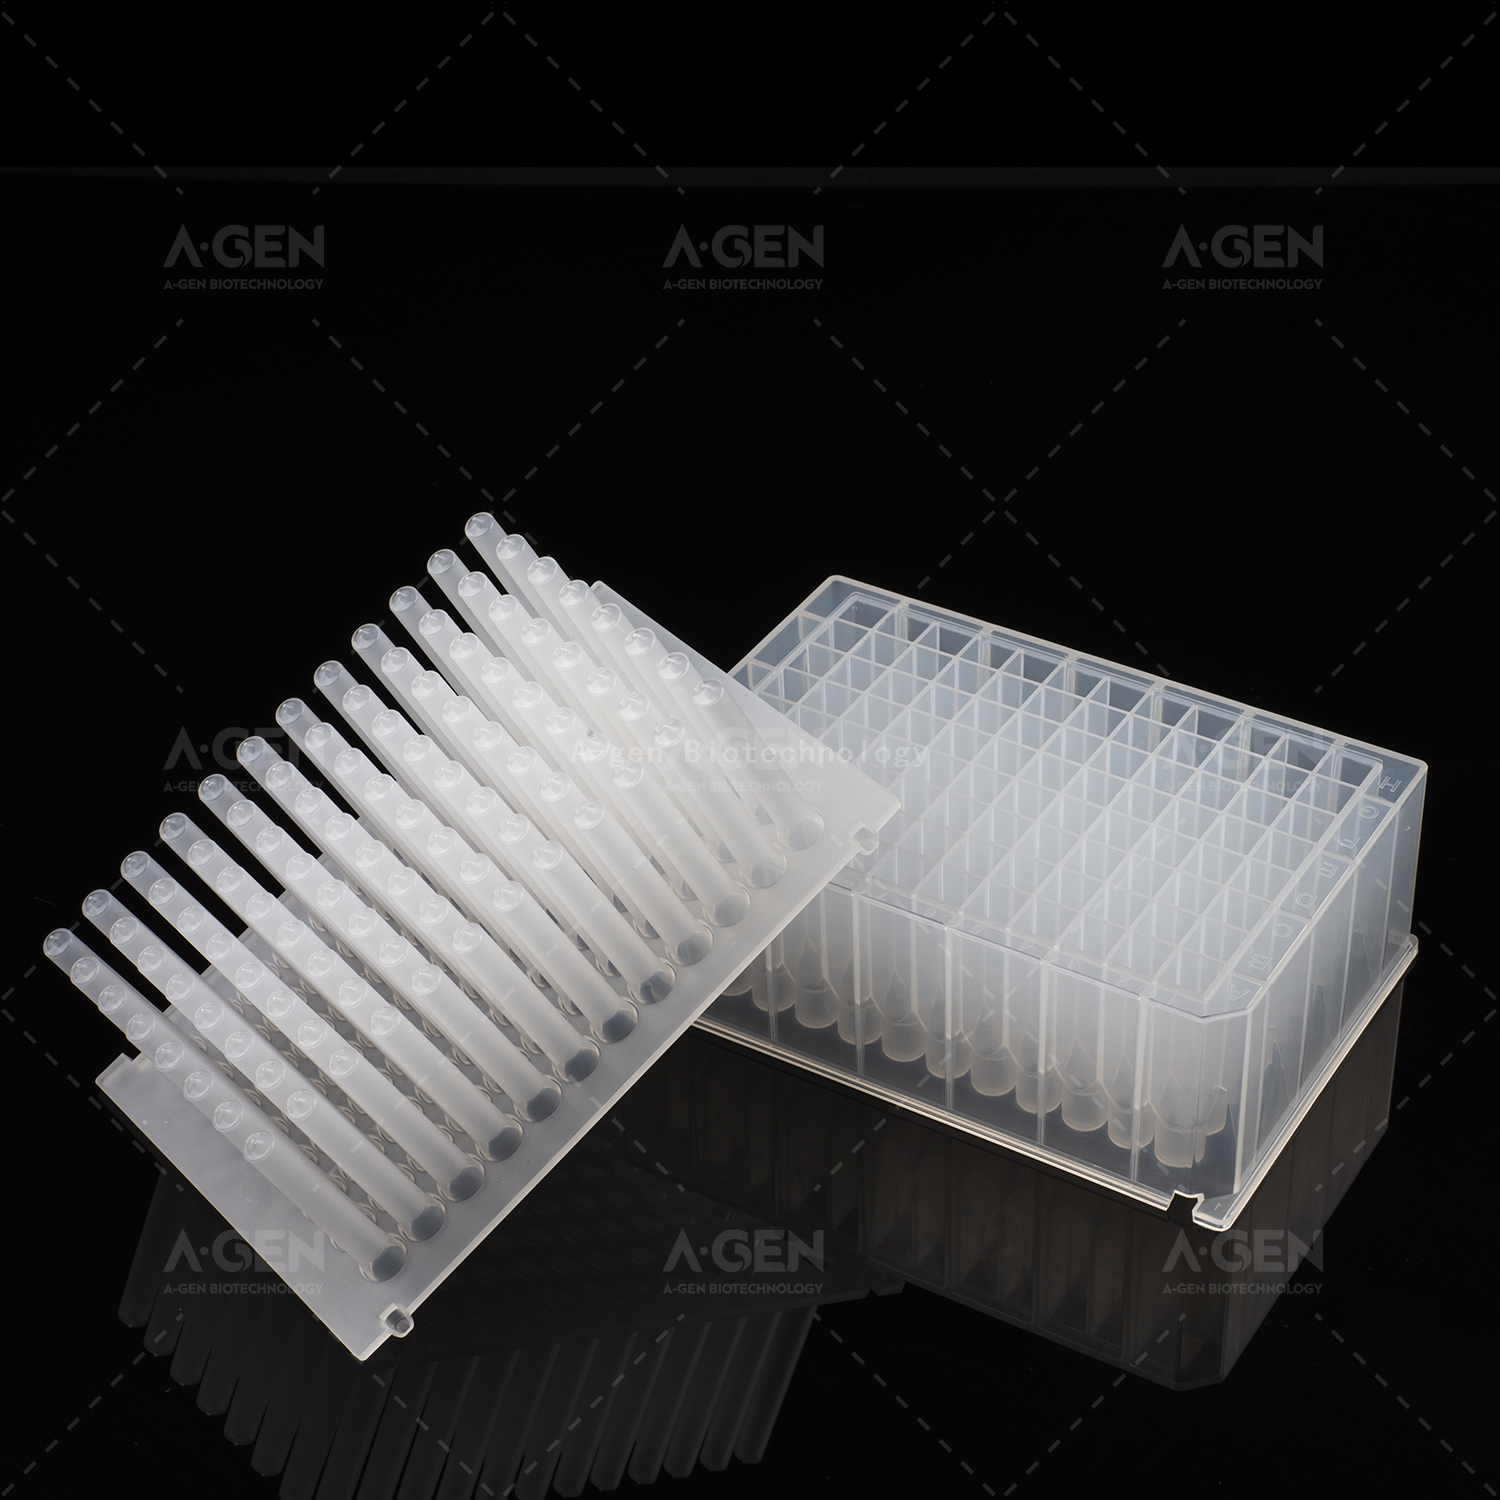 Laboratory Magnetic Bead Tip Comb for 96 Well Extraction Plate Kingfisher Flex